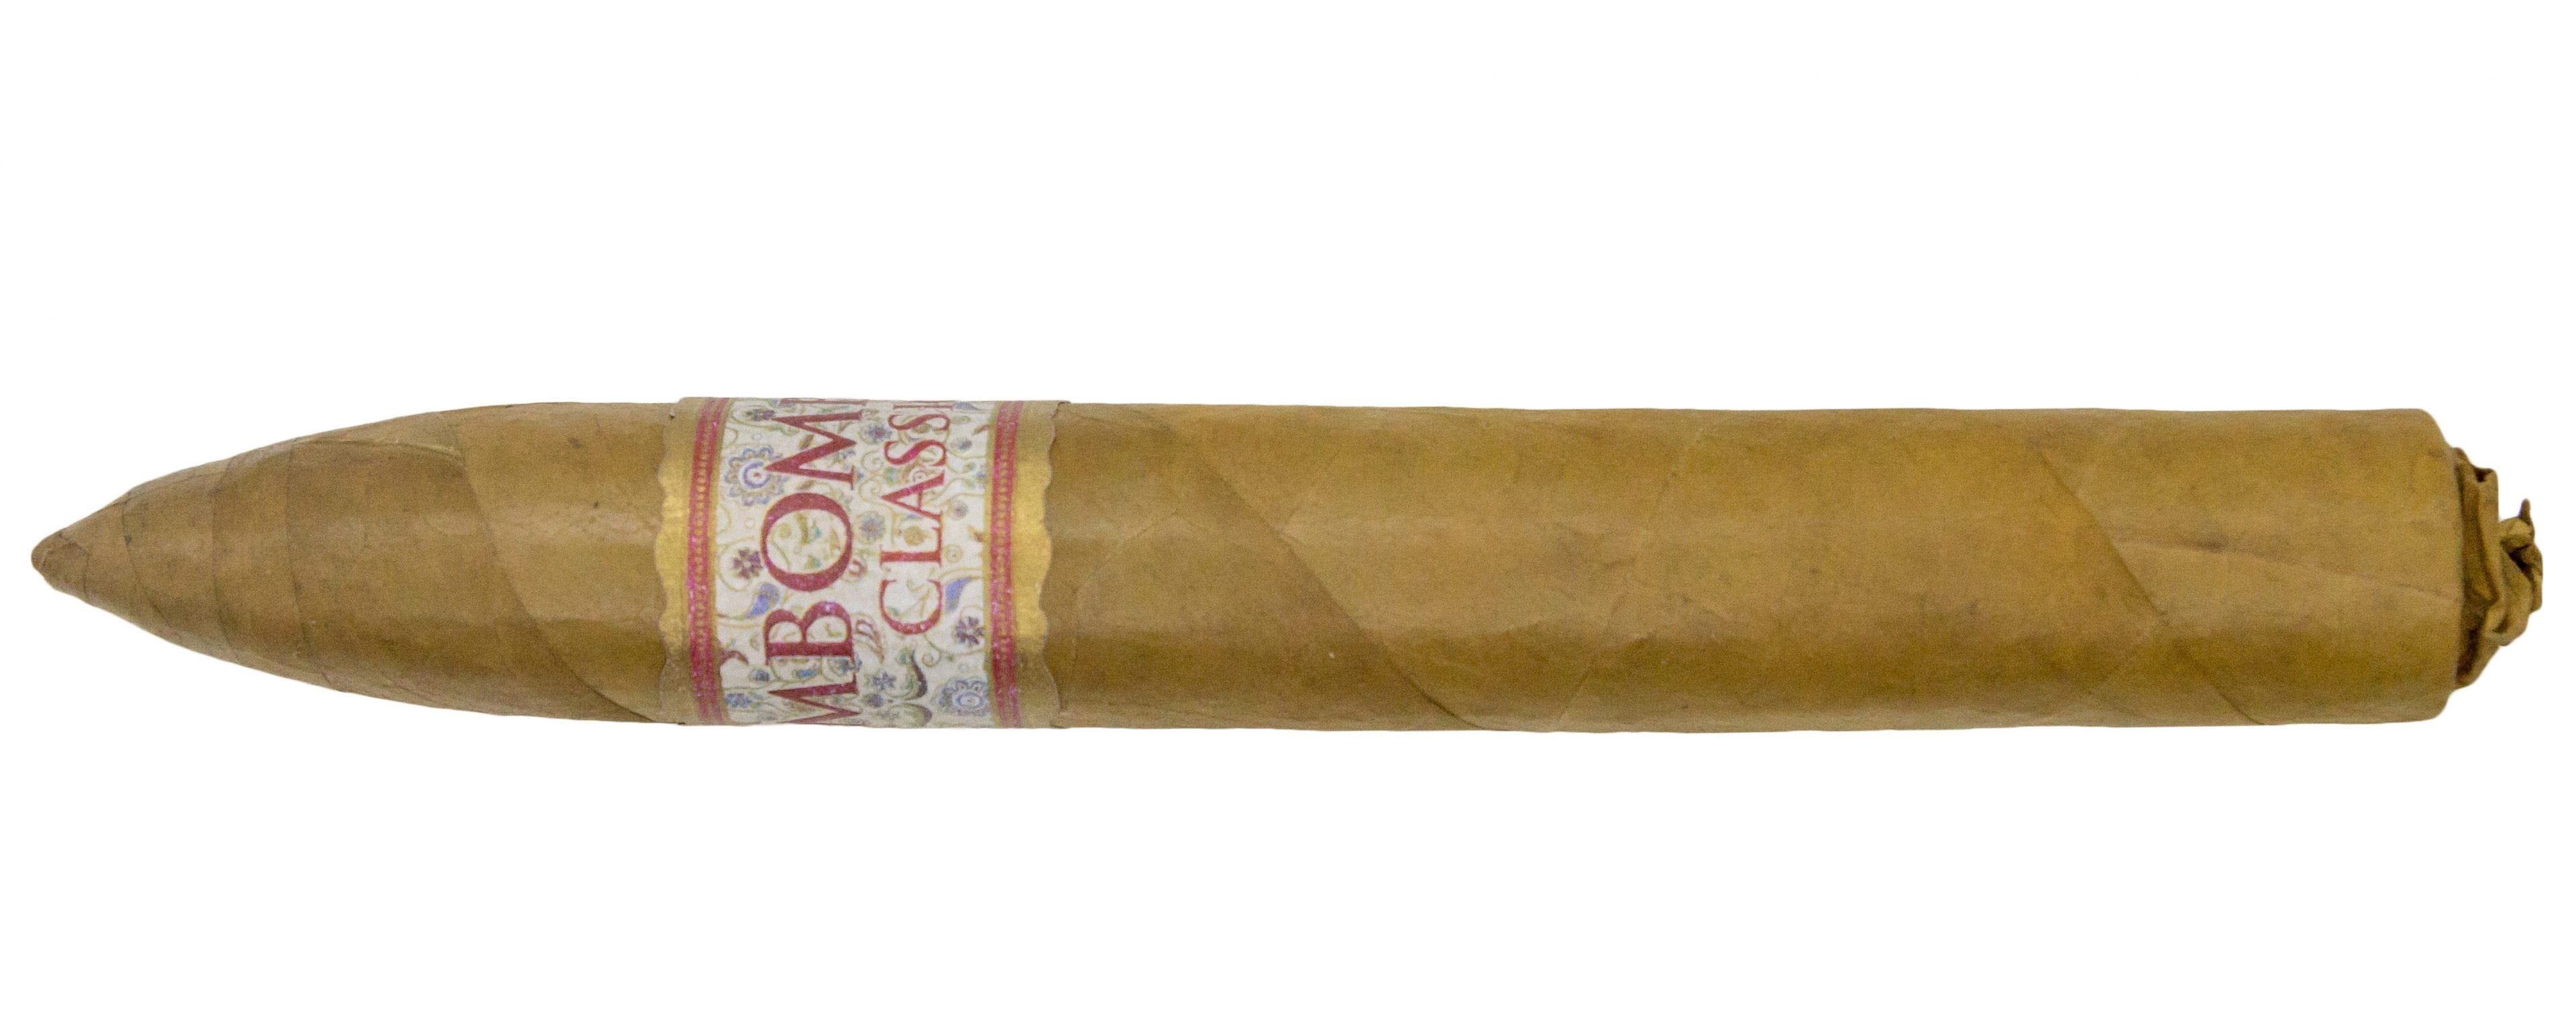 Quick Cigar Review: Mbombay | Classic Torpedo